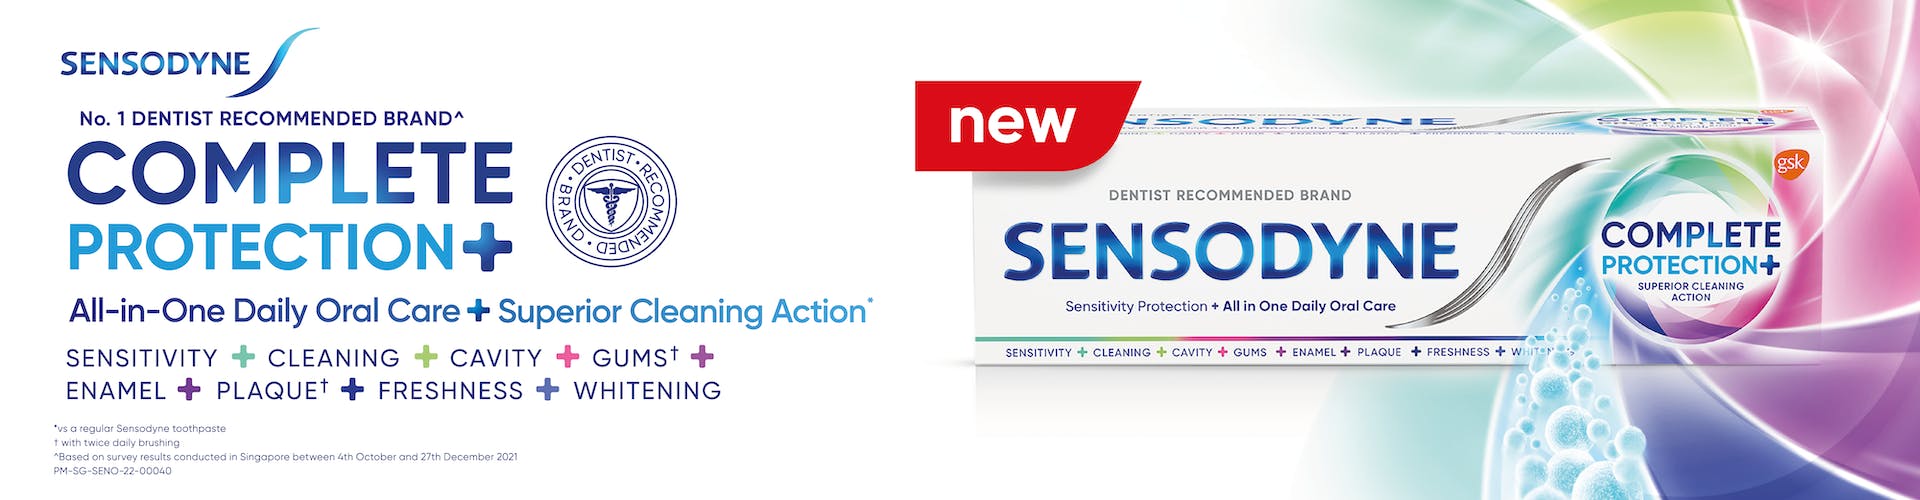 Sensodyne Olympia Complete Protection banner